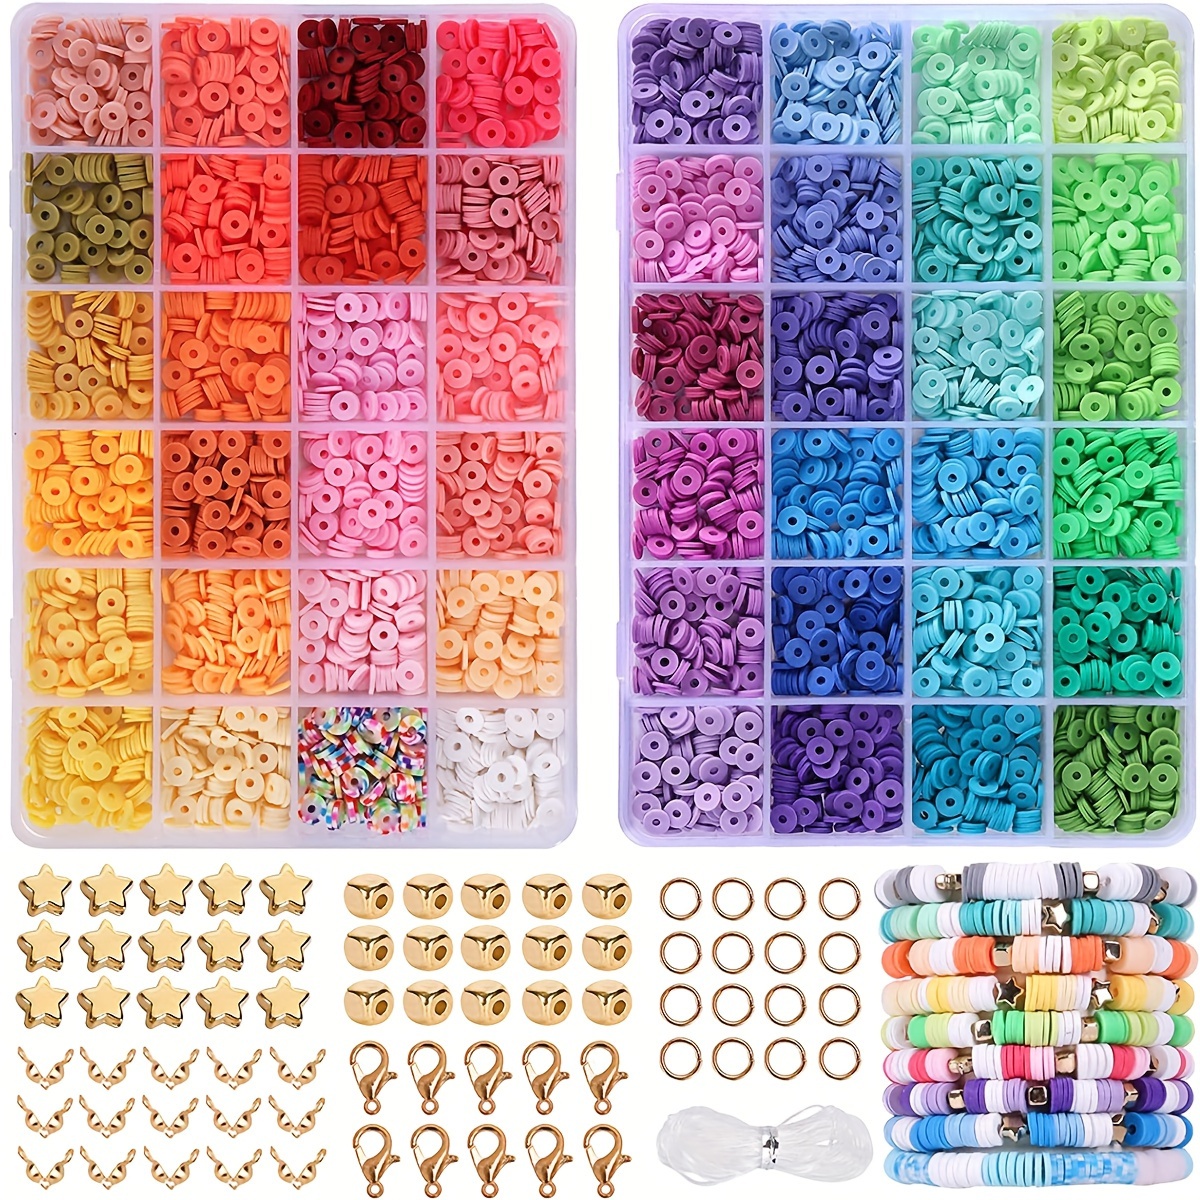 500pcs 6mm (0.236in) Mixed Color Polymer Clay Beads Bulk Fashion